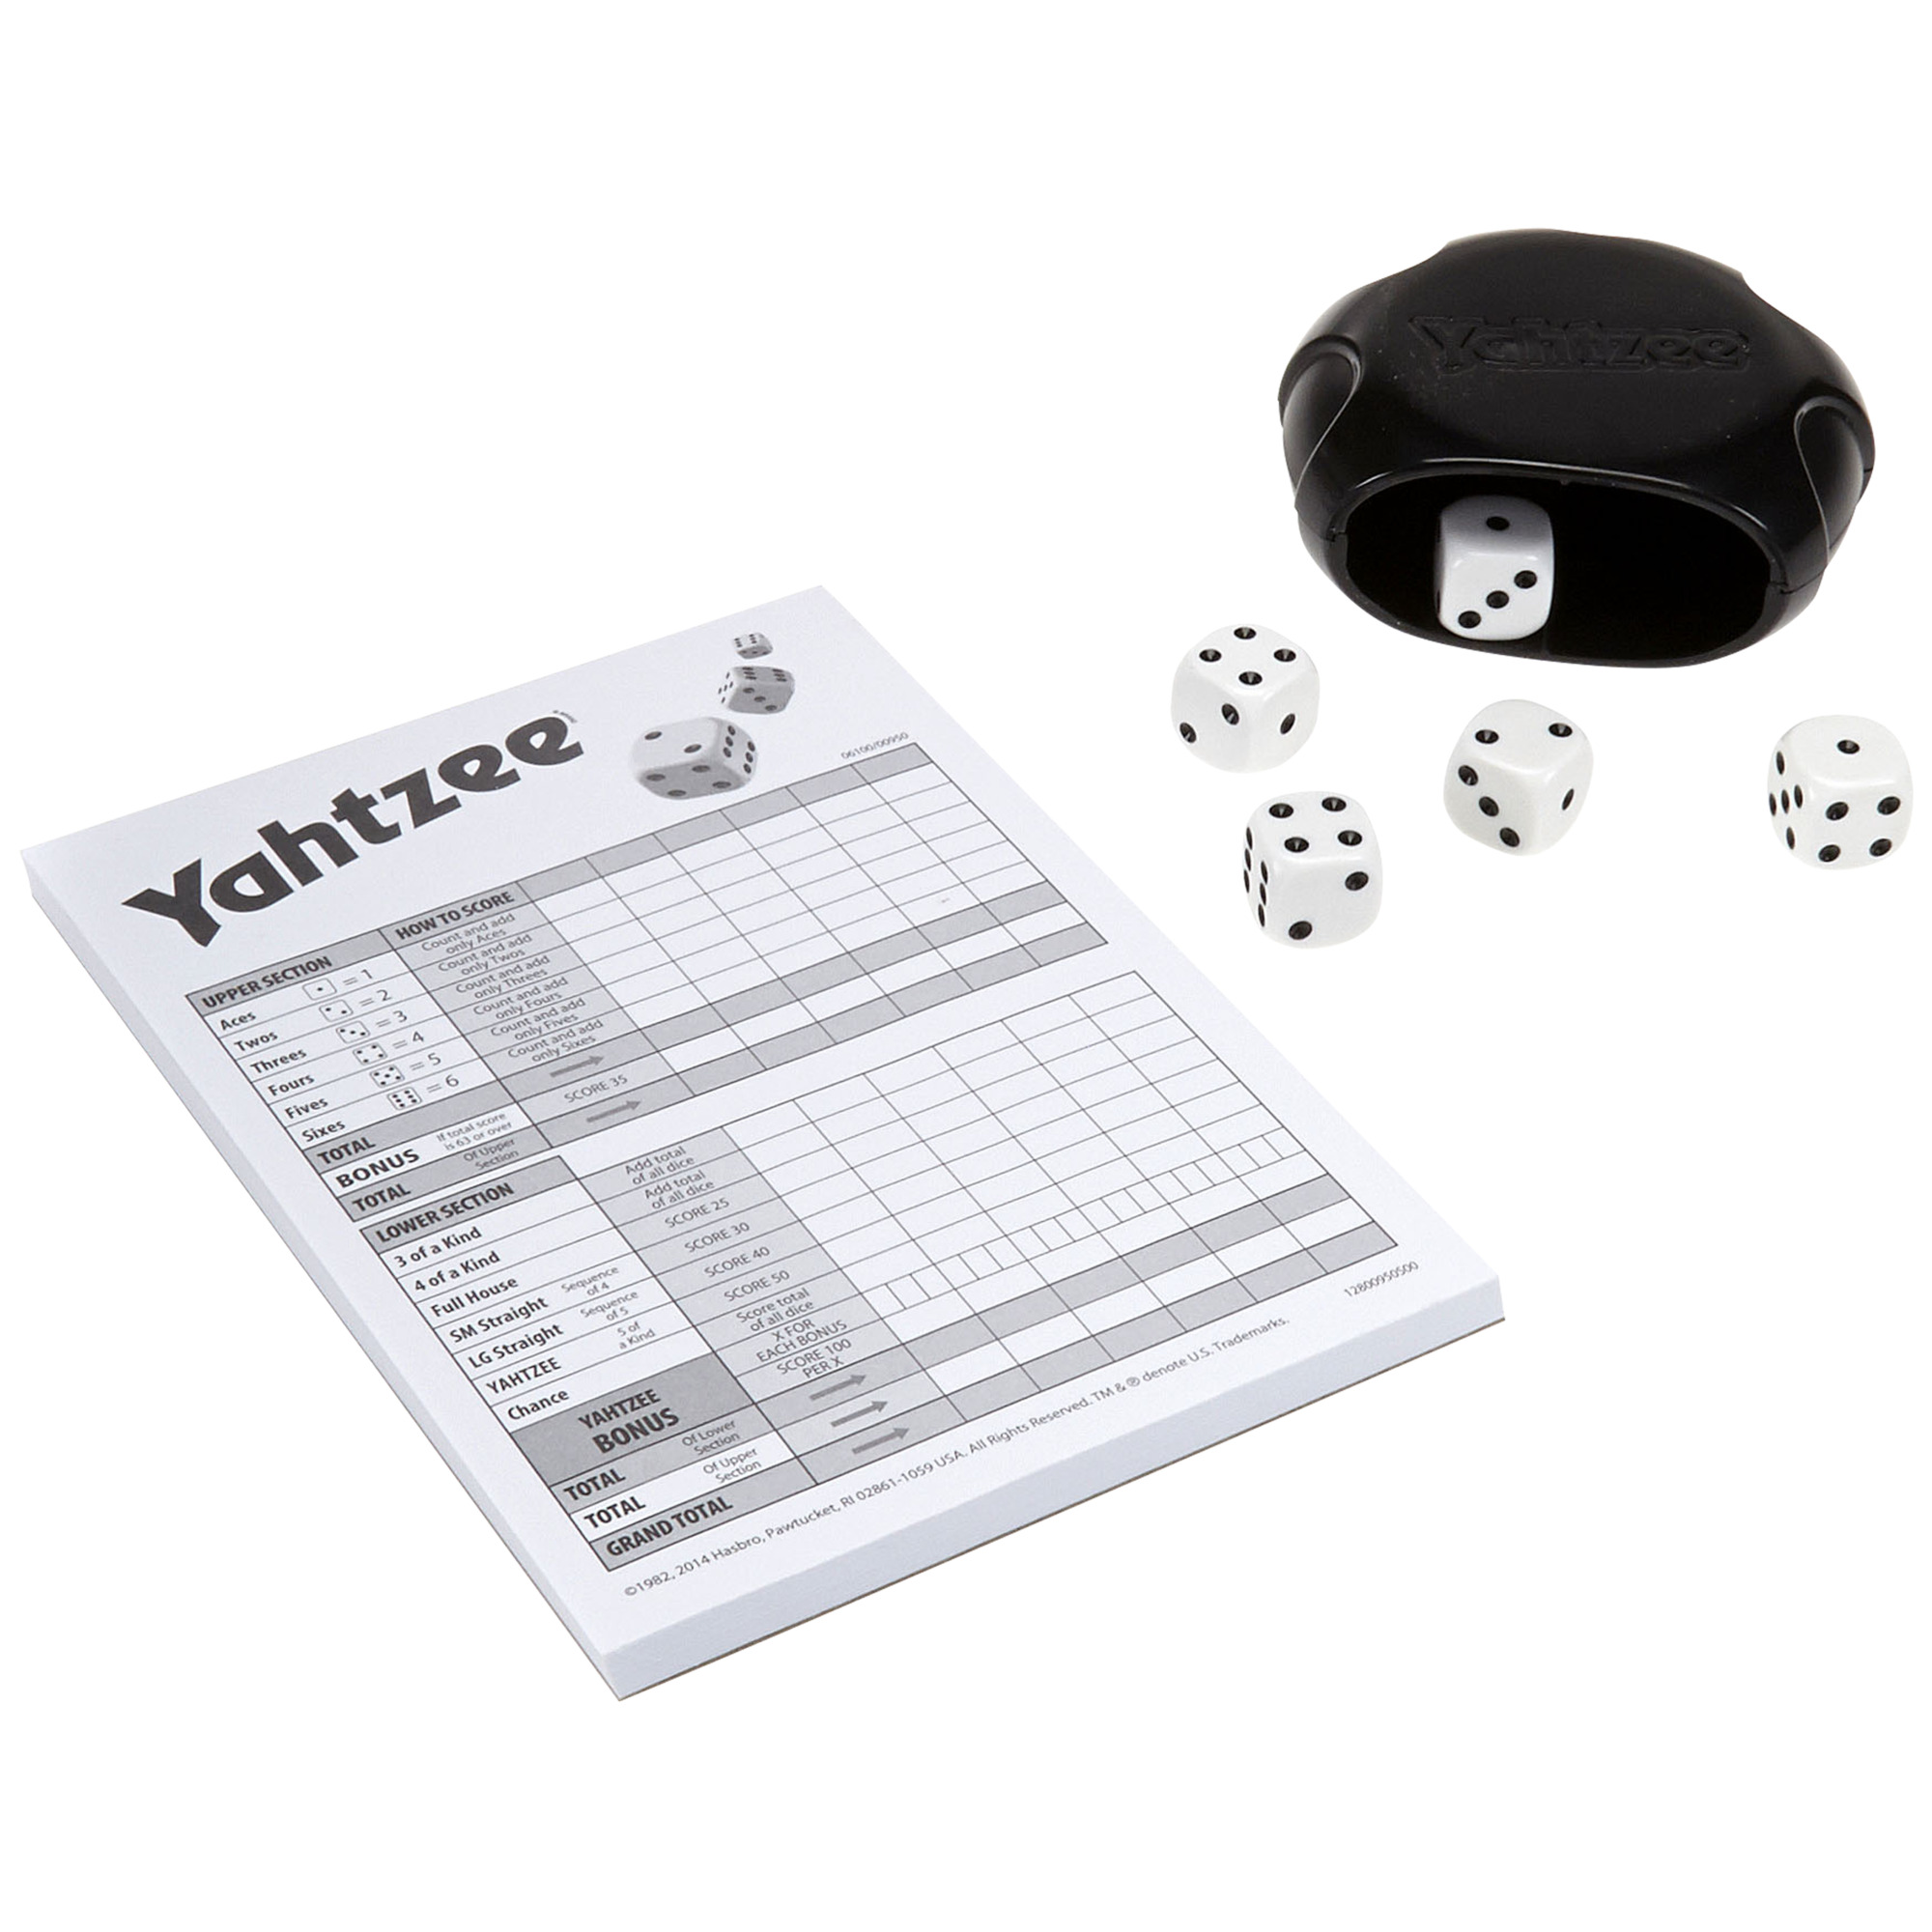 YAHTZEE Classic Board Game for Kids and Family with Shaker and Dice Ages 8 and Up, 2+ Players - image 3 of 11